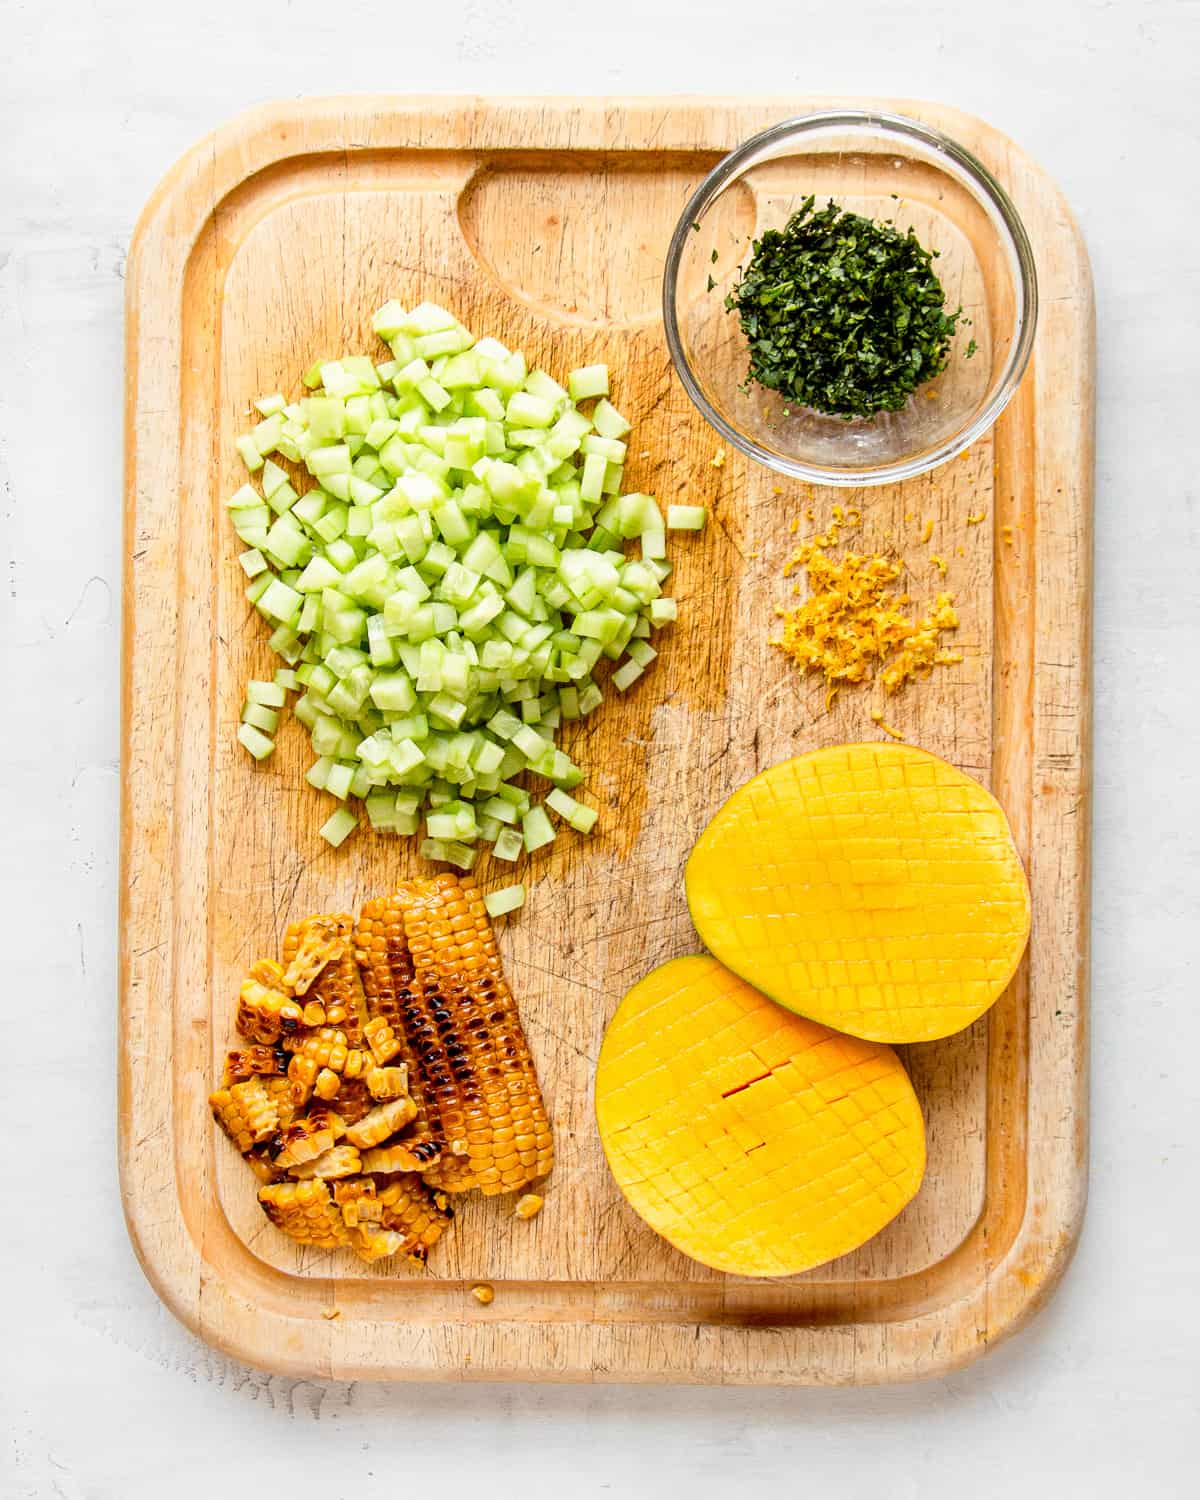 Diced cucumber, mango, and grilled corn on a wooden cutting board.